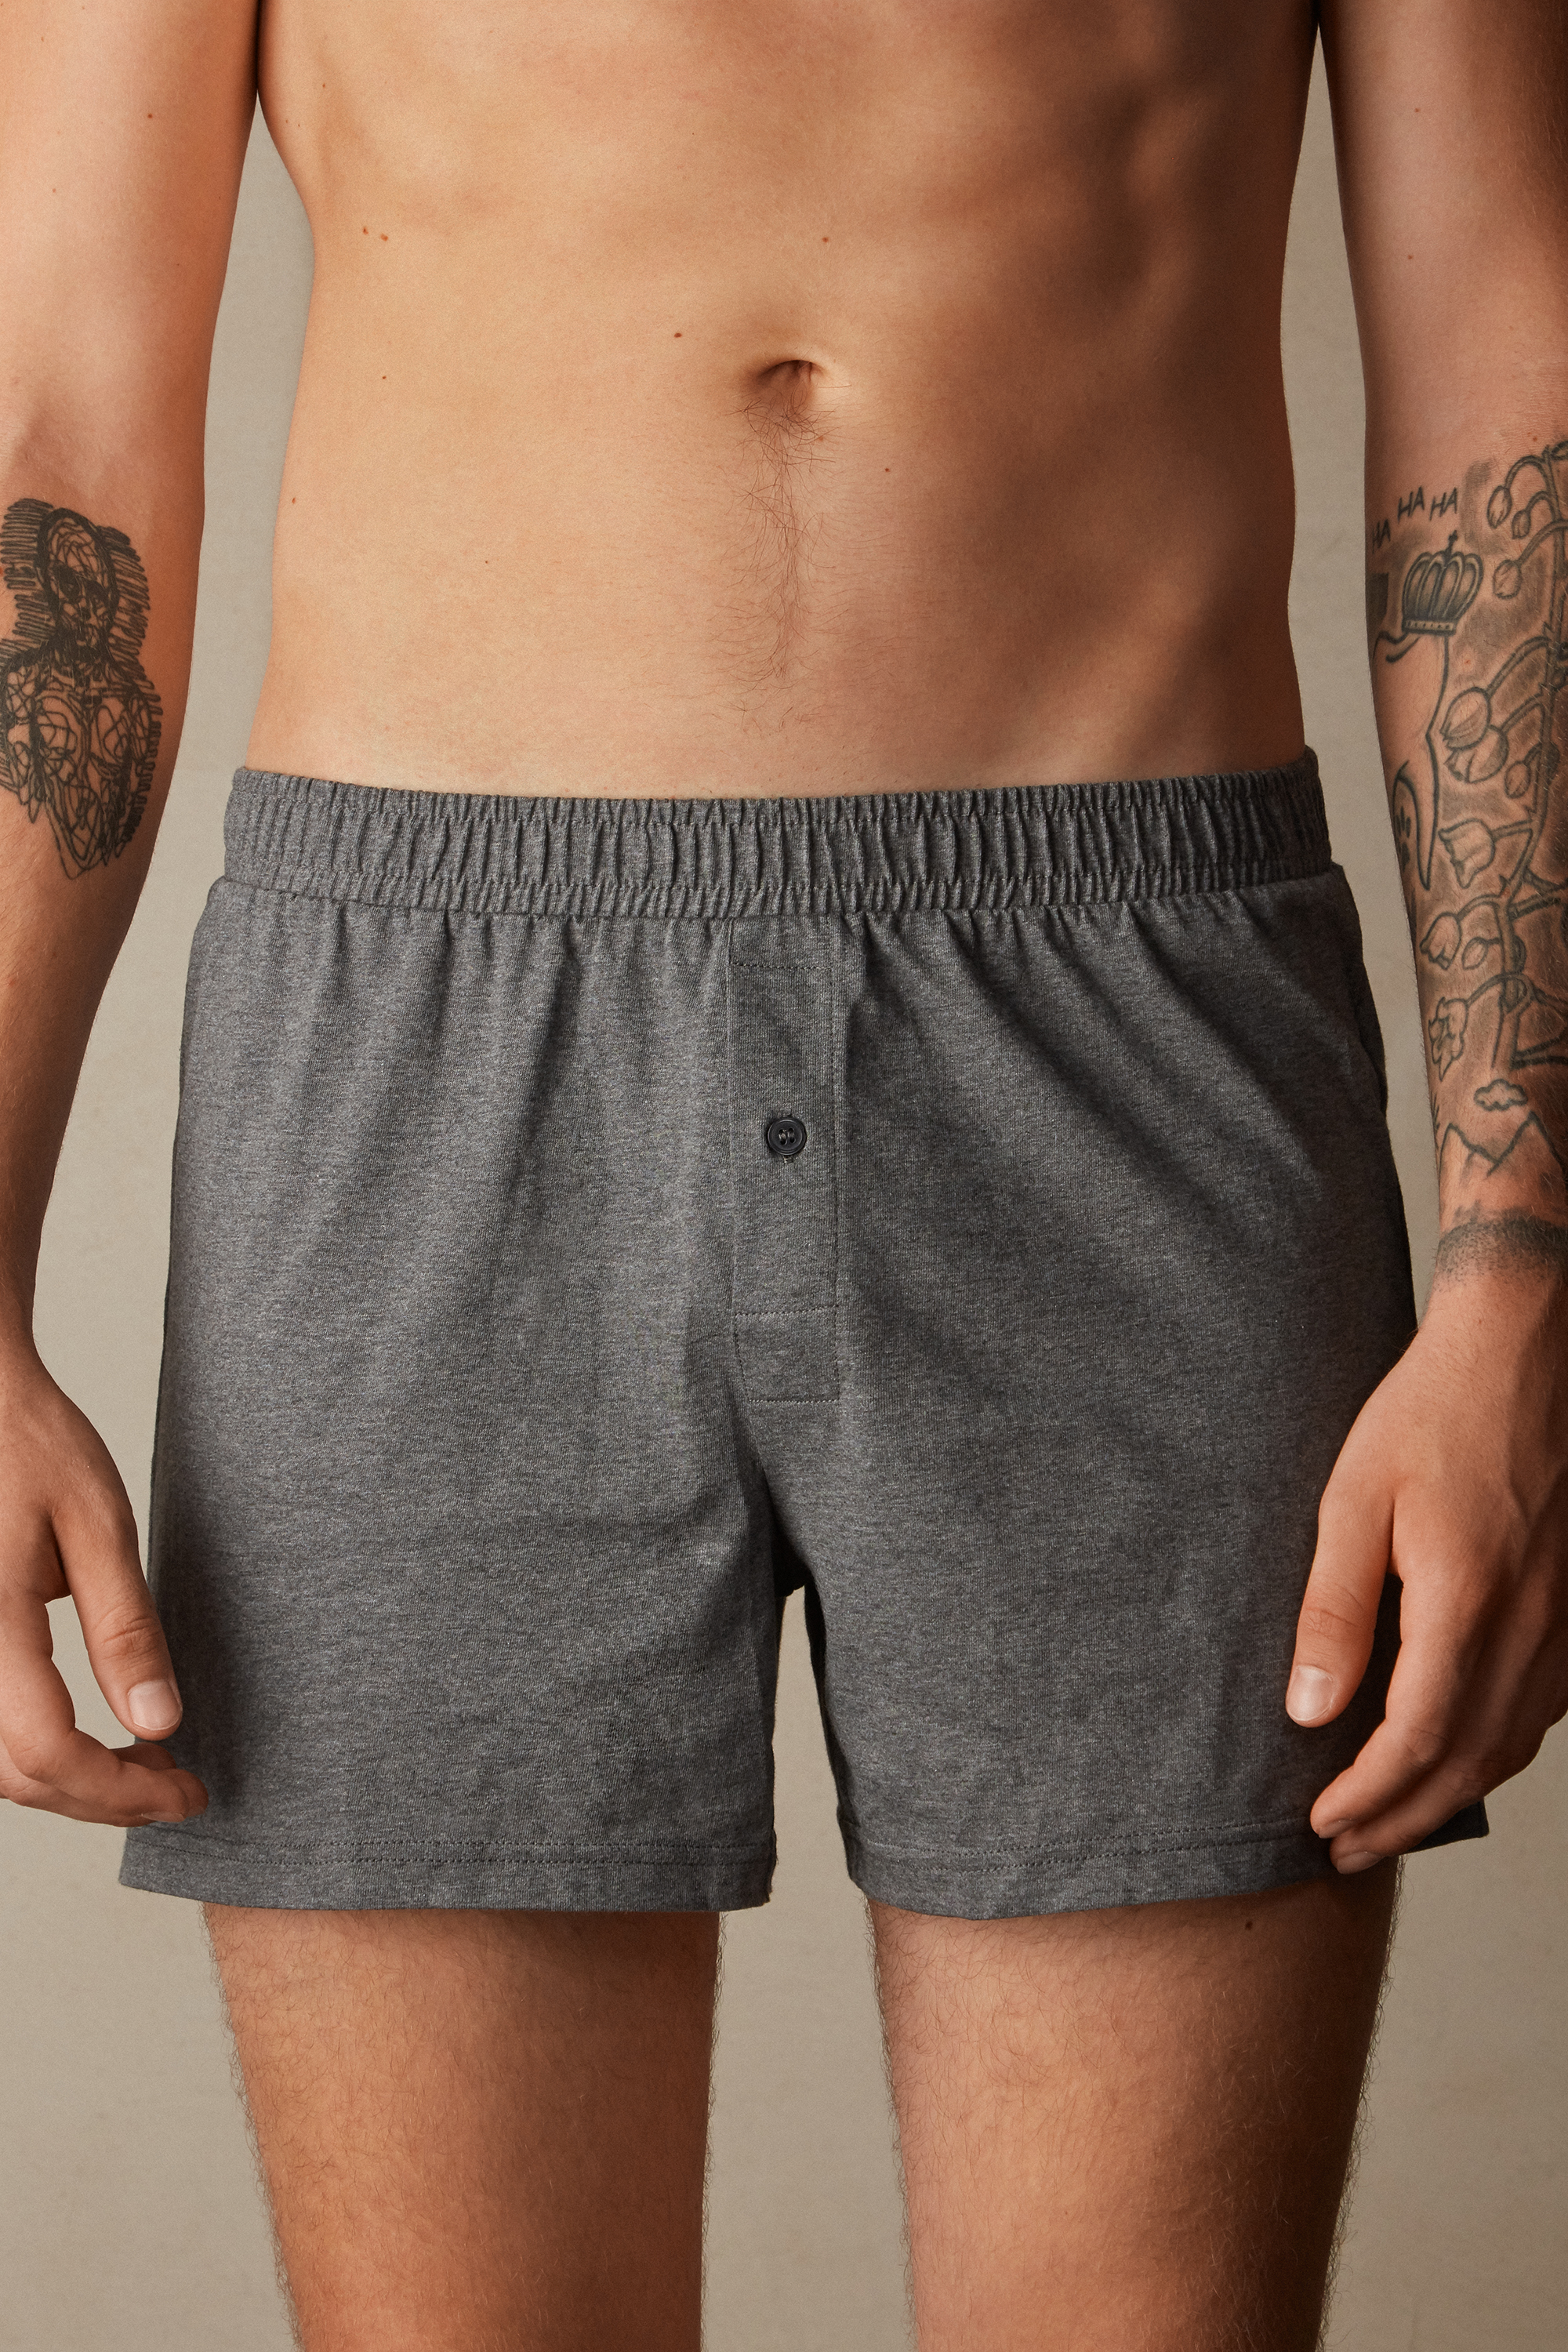 Gelach Planeet Donau Solid Color Cotton Jersey Relaxed Fit Boxers | Intimissimi